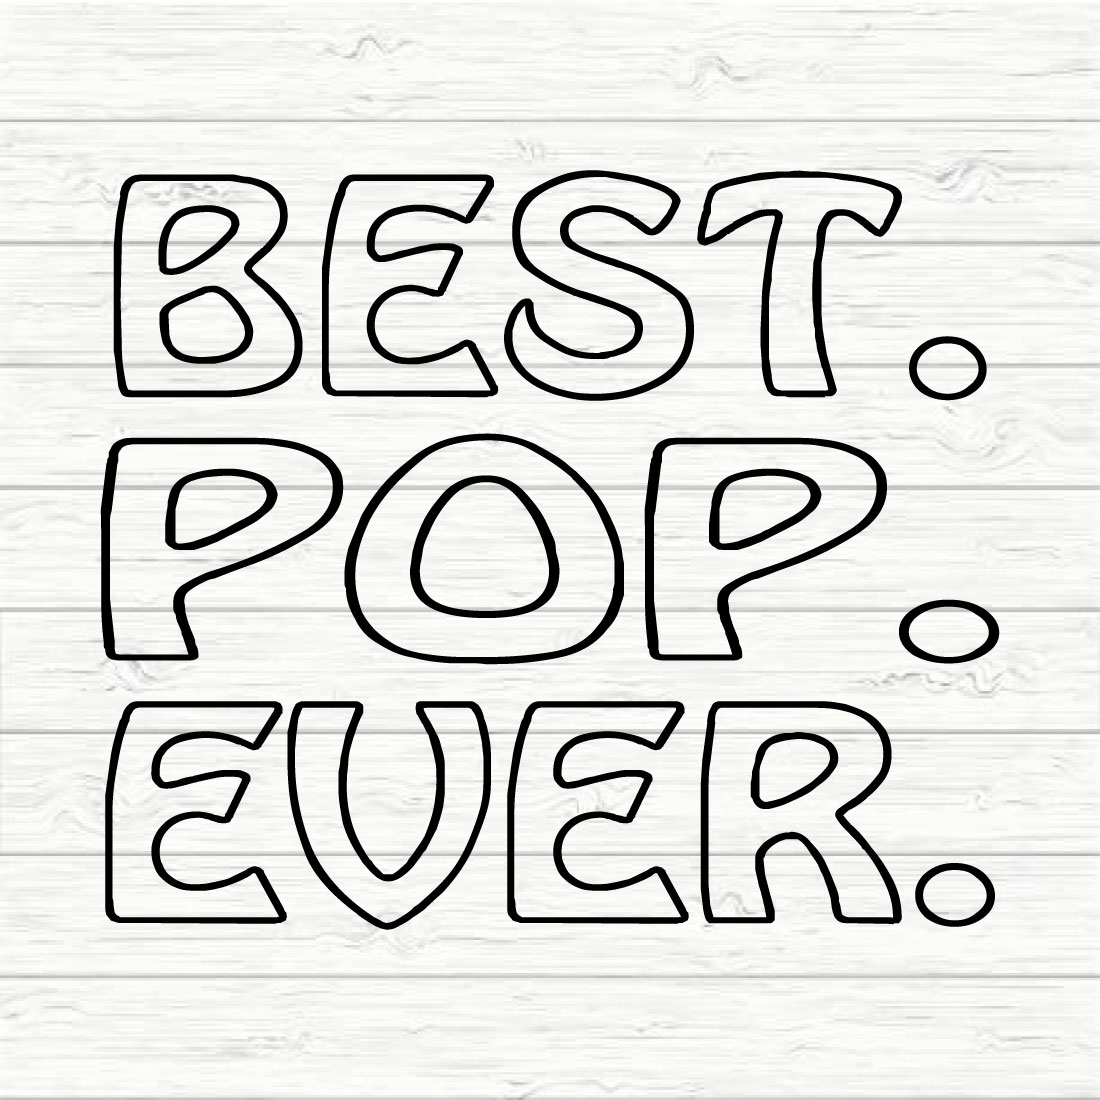 Best Pop Ever preview image.